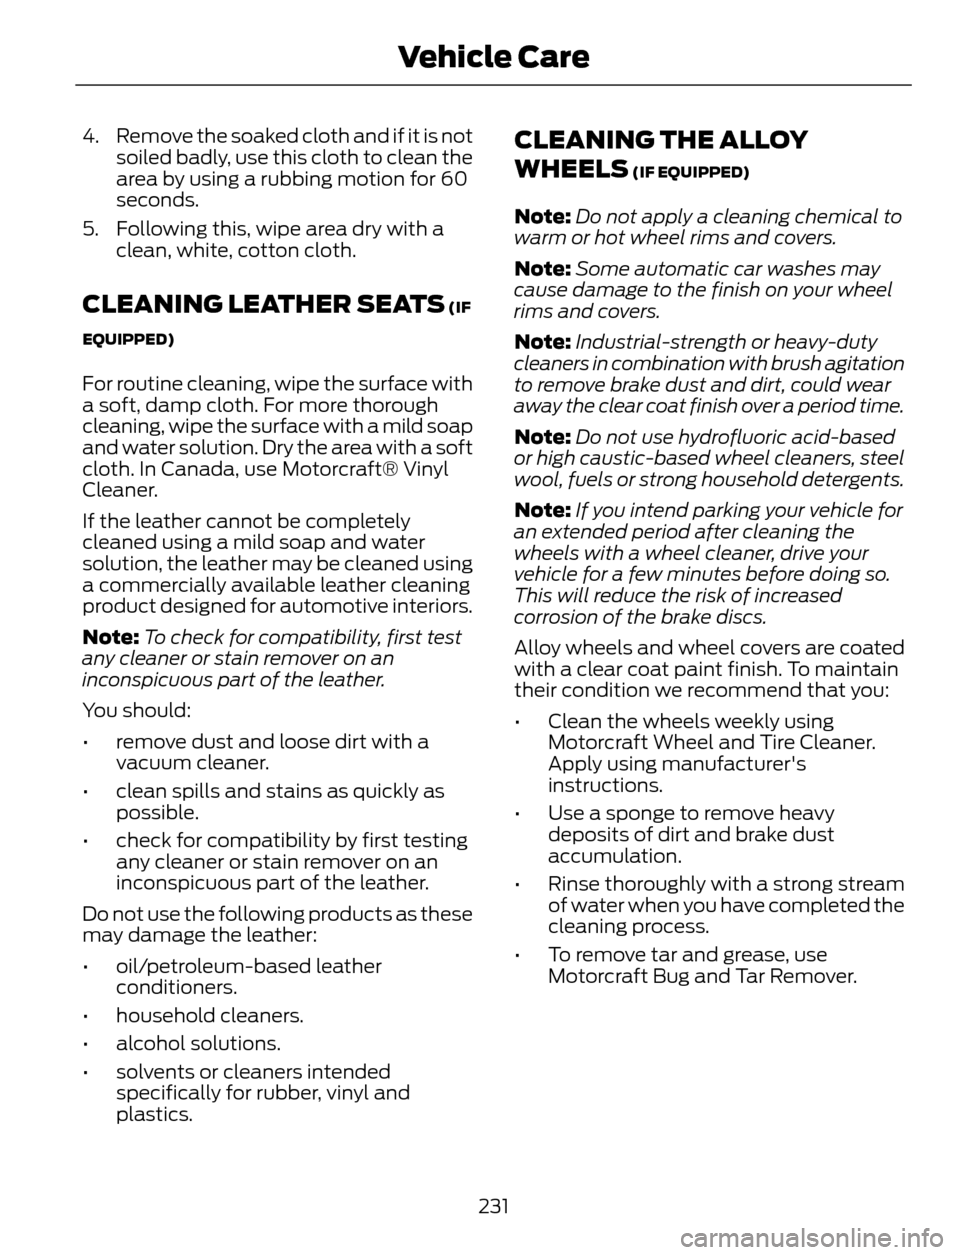 FORD ESCAPE 2014 3.G Owners Manual 4. Remove the soaked cloth and if it is not
soiled badly, use this cloth to clean the
area by using a rubbing motion for 60
seconds.
5. Following this, wipe area dry with a
clean, white, cotton cloth.